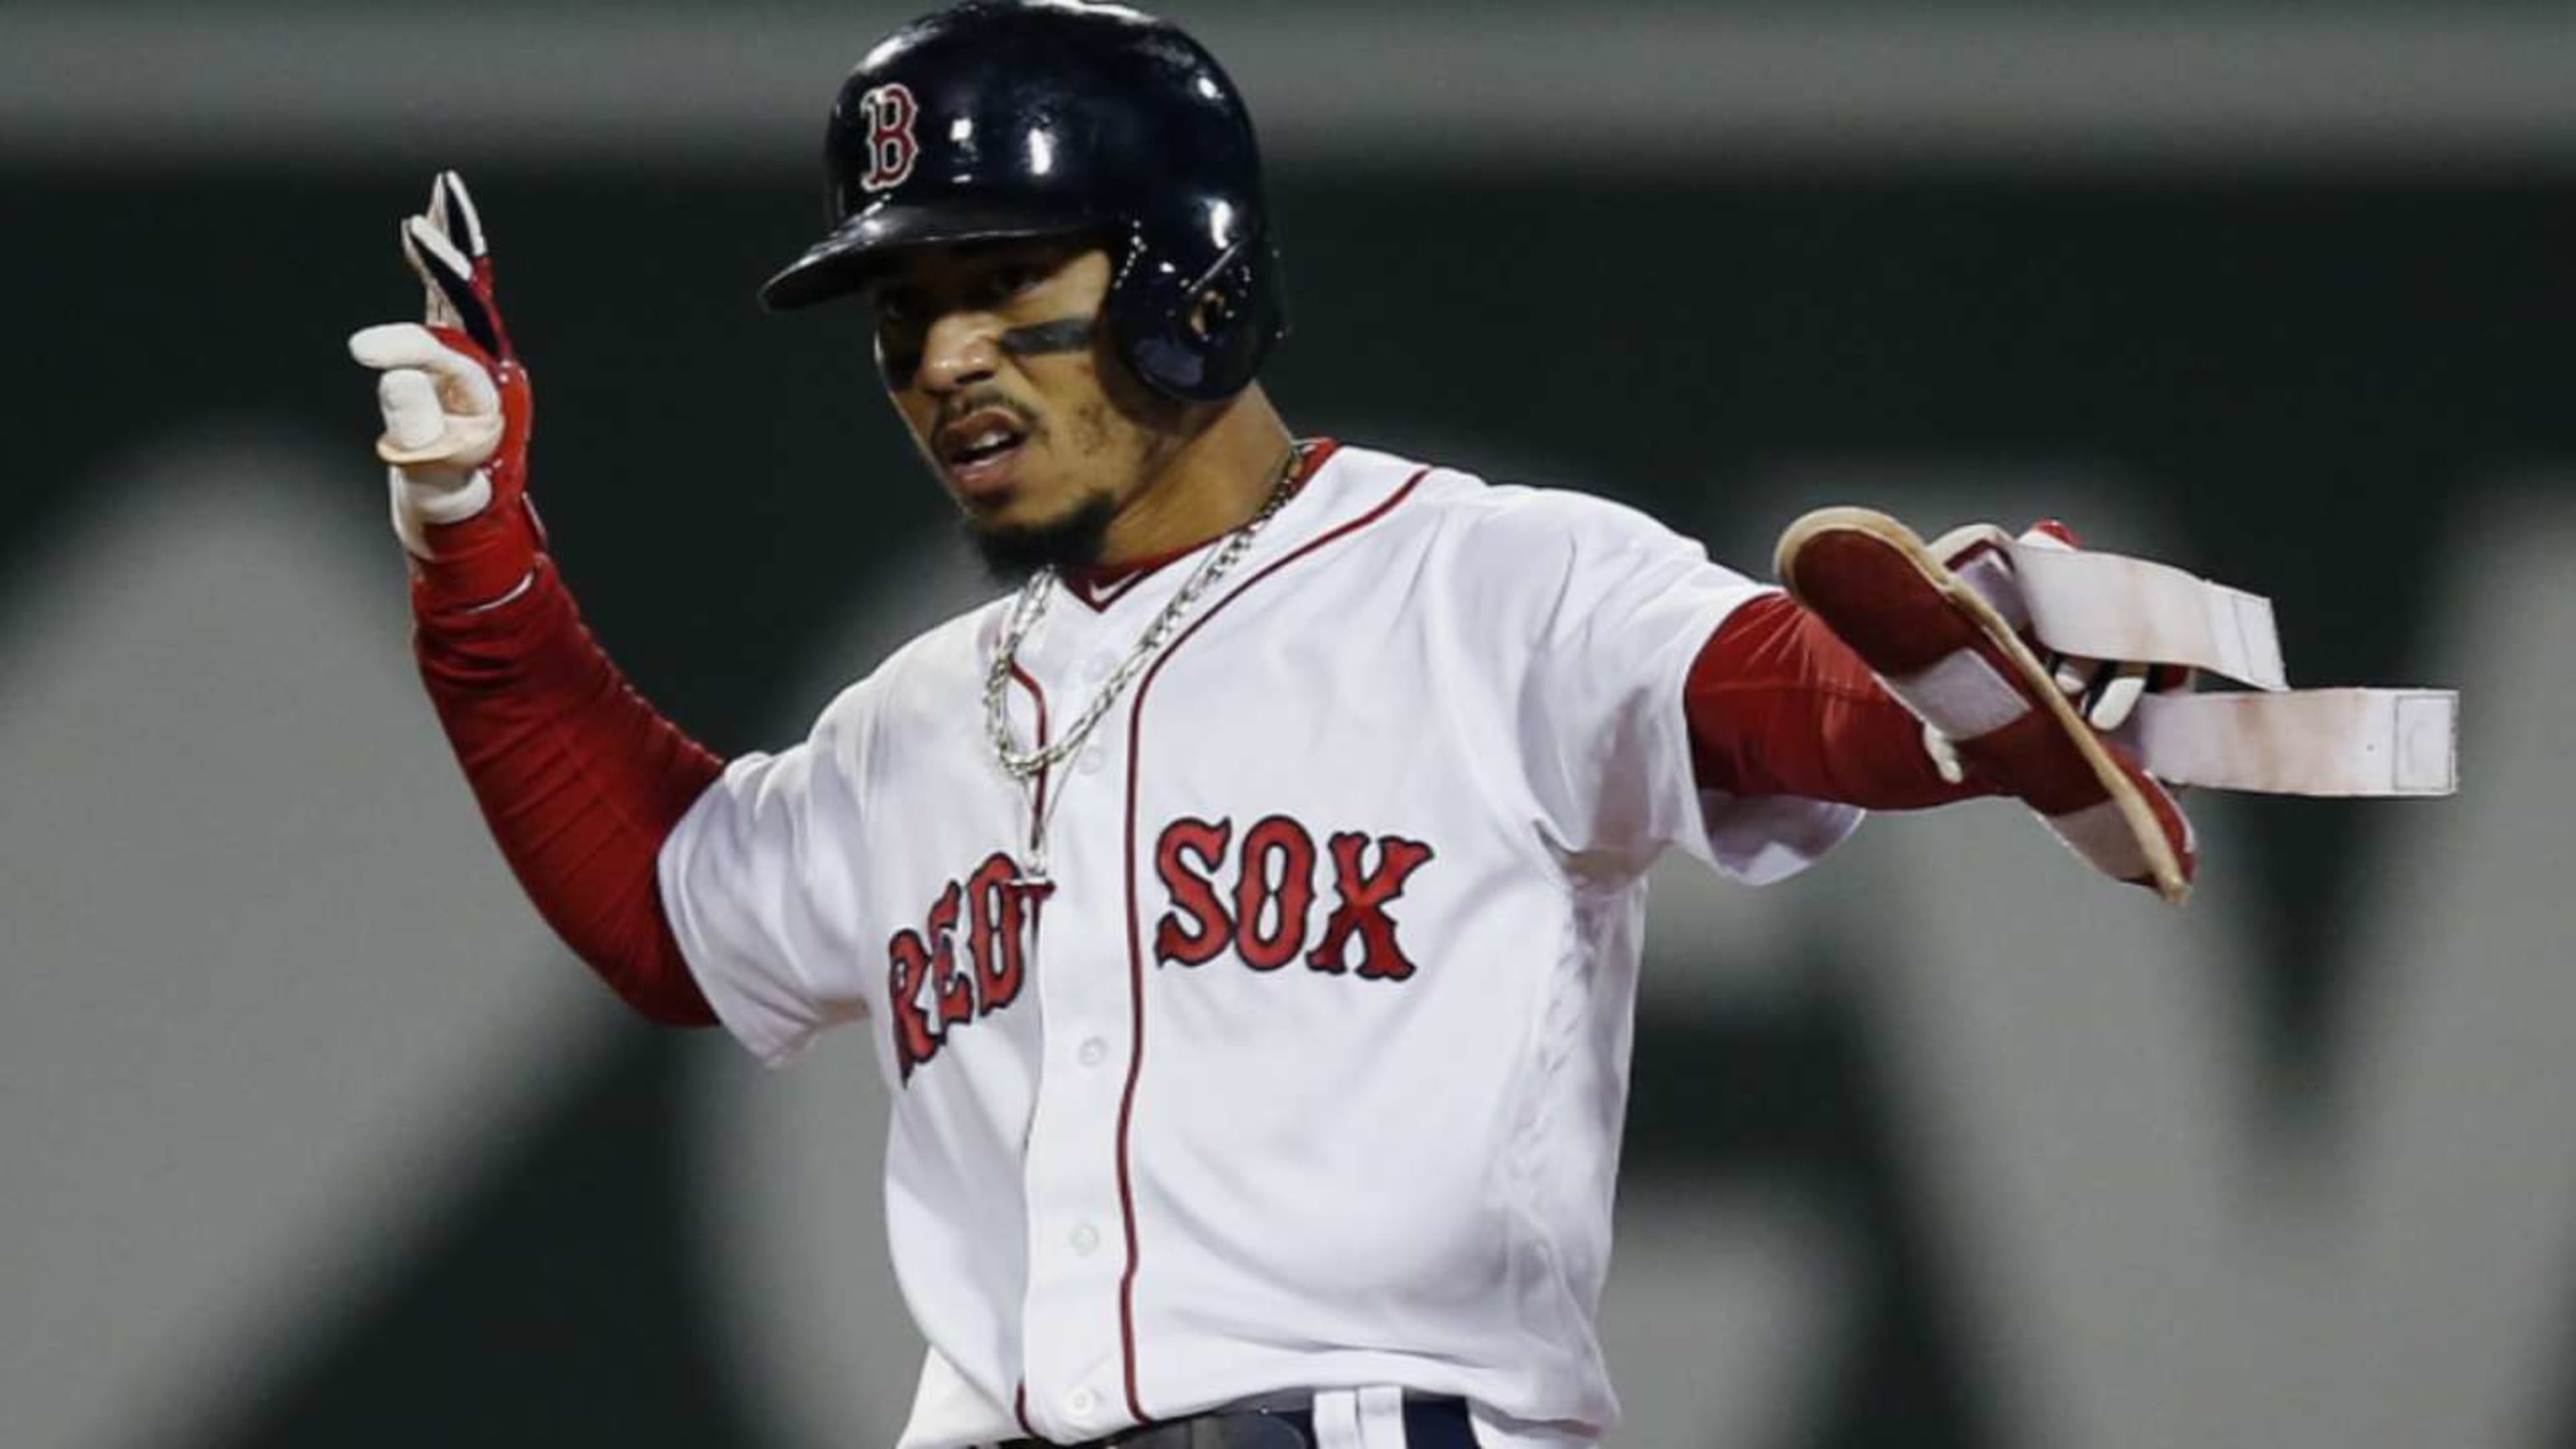 MVP Mookie! Mookie Betts was a dominant force on the Boston Red Sox!